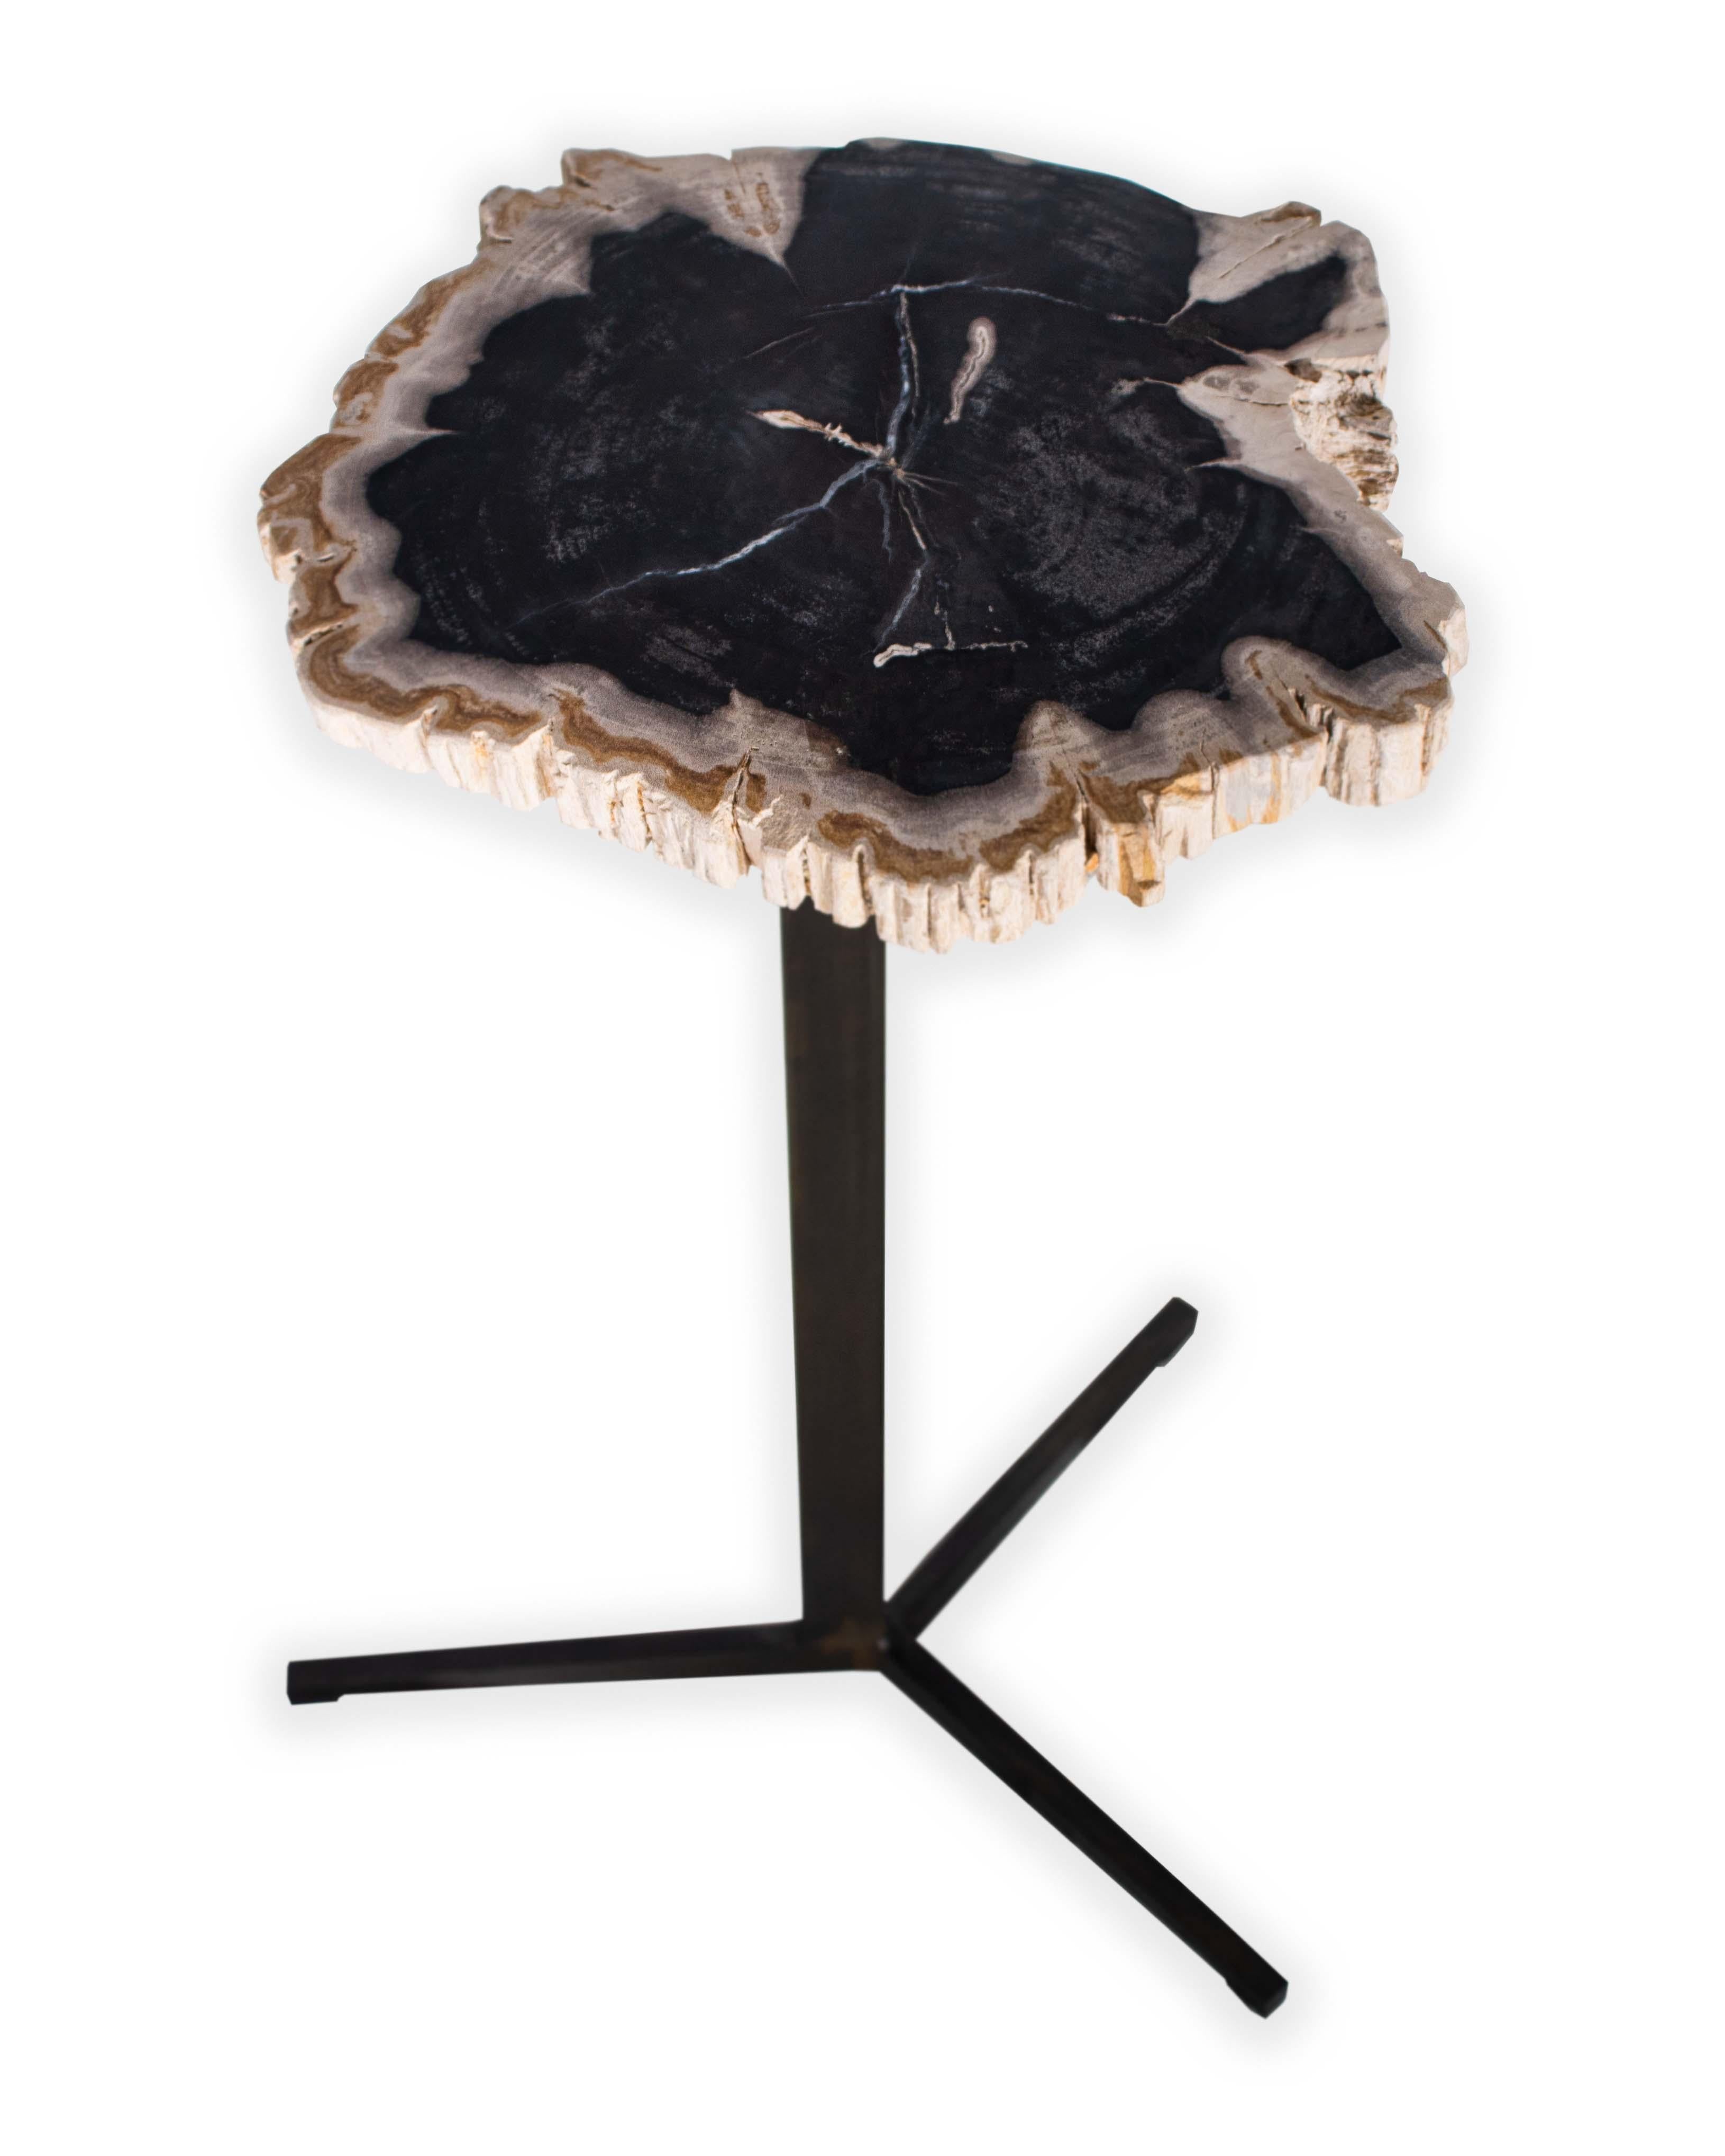 Petrified wood slab on patinated steel mount

Piece from our one of a kind collection, Le Monde. Exclusive to Brendan Bass.